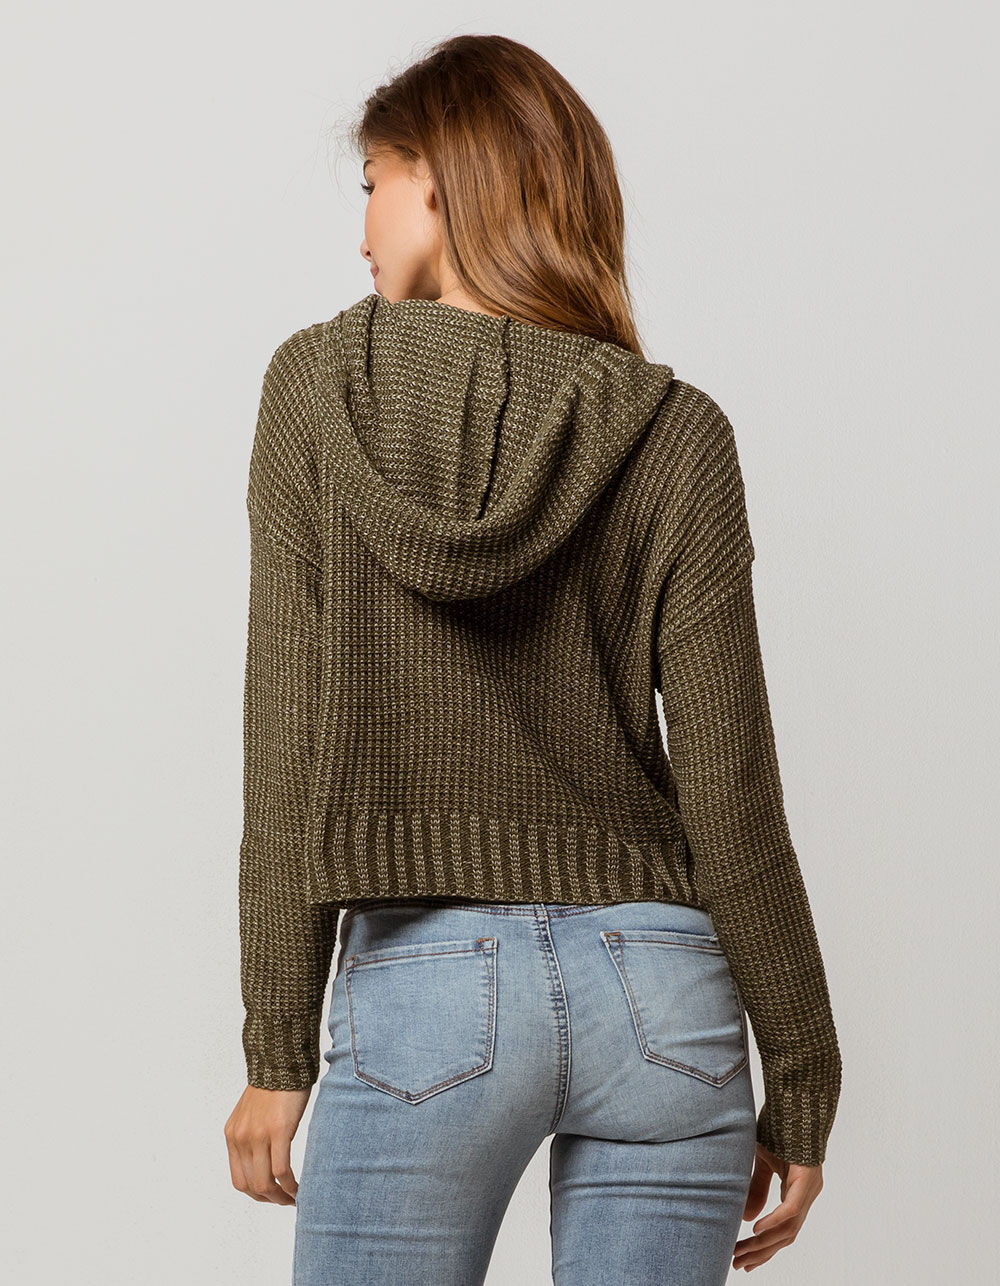 SKY AND SPARROW Crop Olive Womens Hooded Sweater image number 2